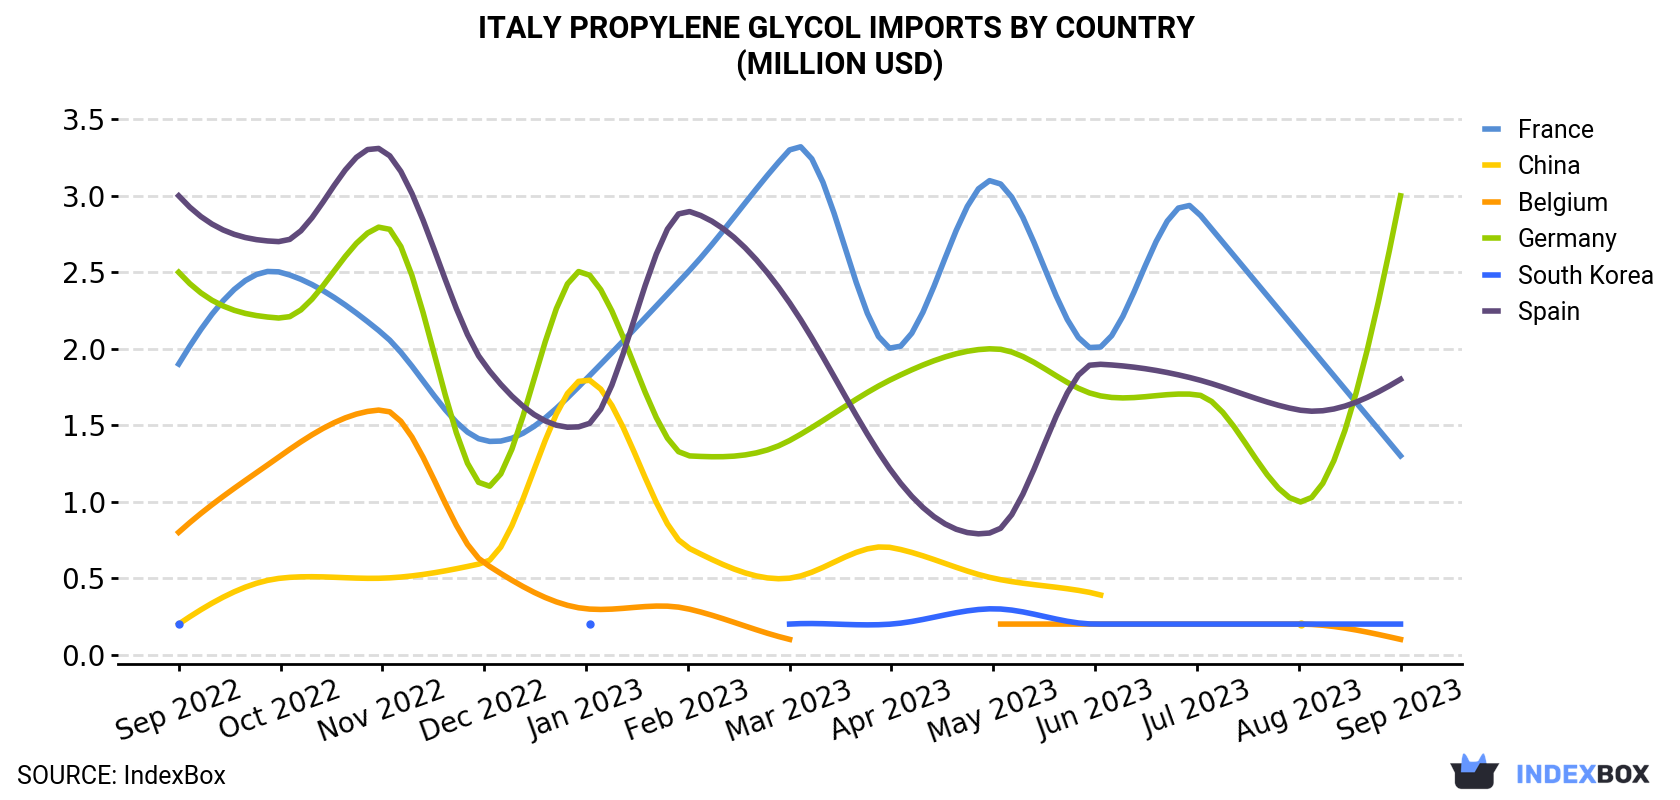 Italy Propylene Glycol Imports By Country (Million USD)